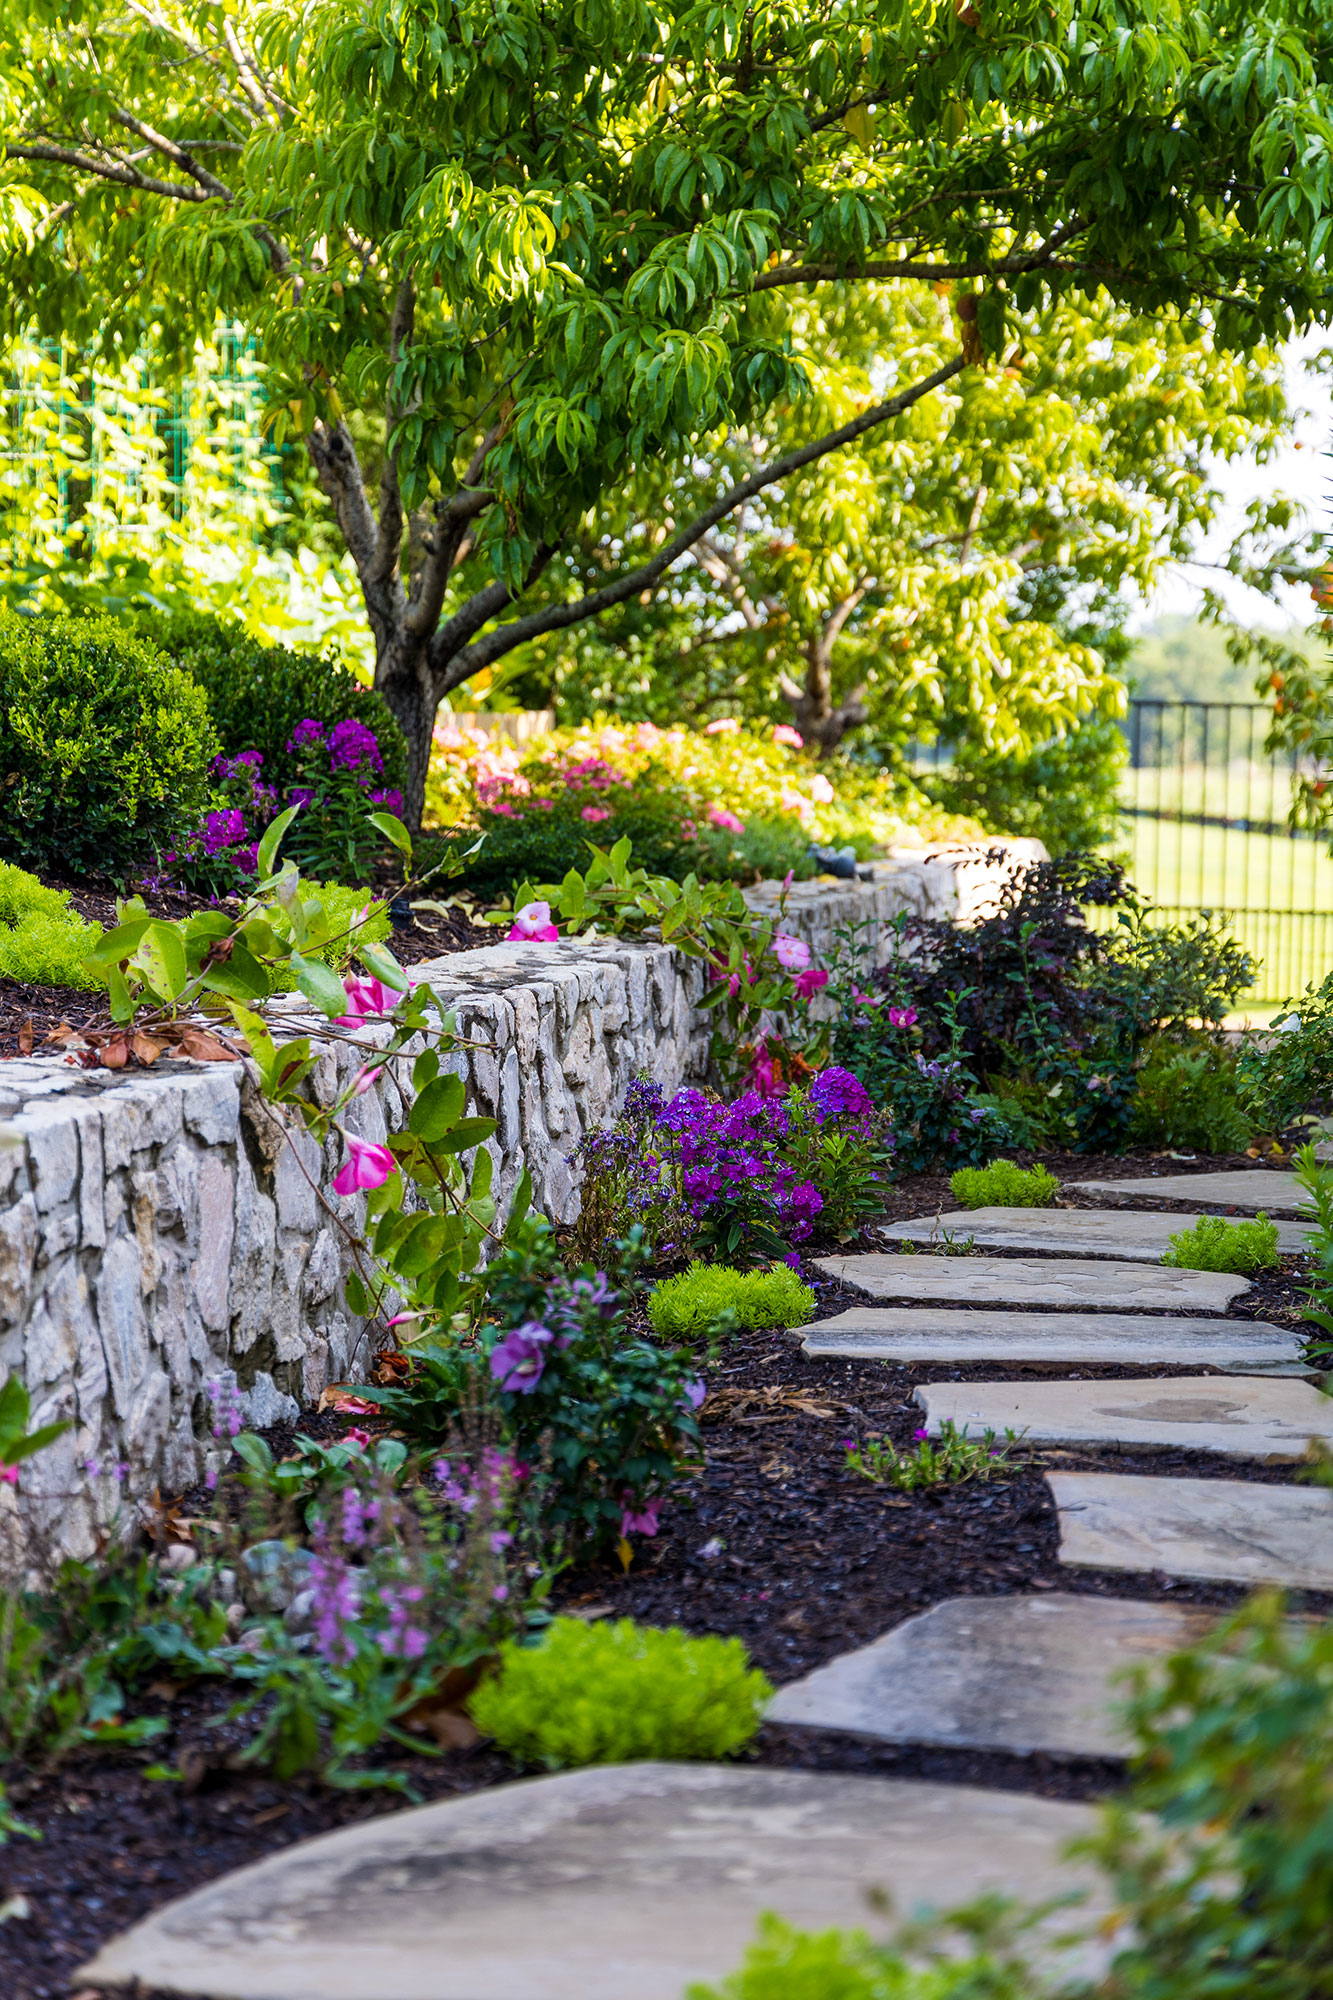 Five Situations Where You Should Really Stop and Hire a Landscape Designer